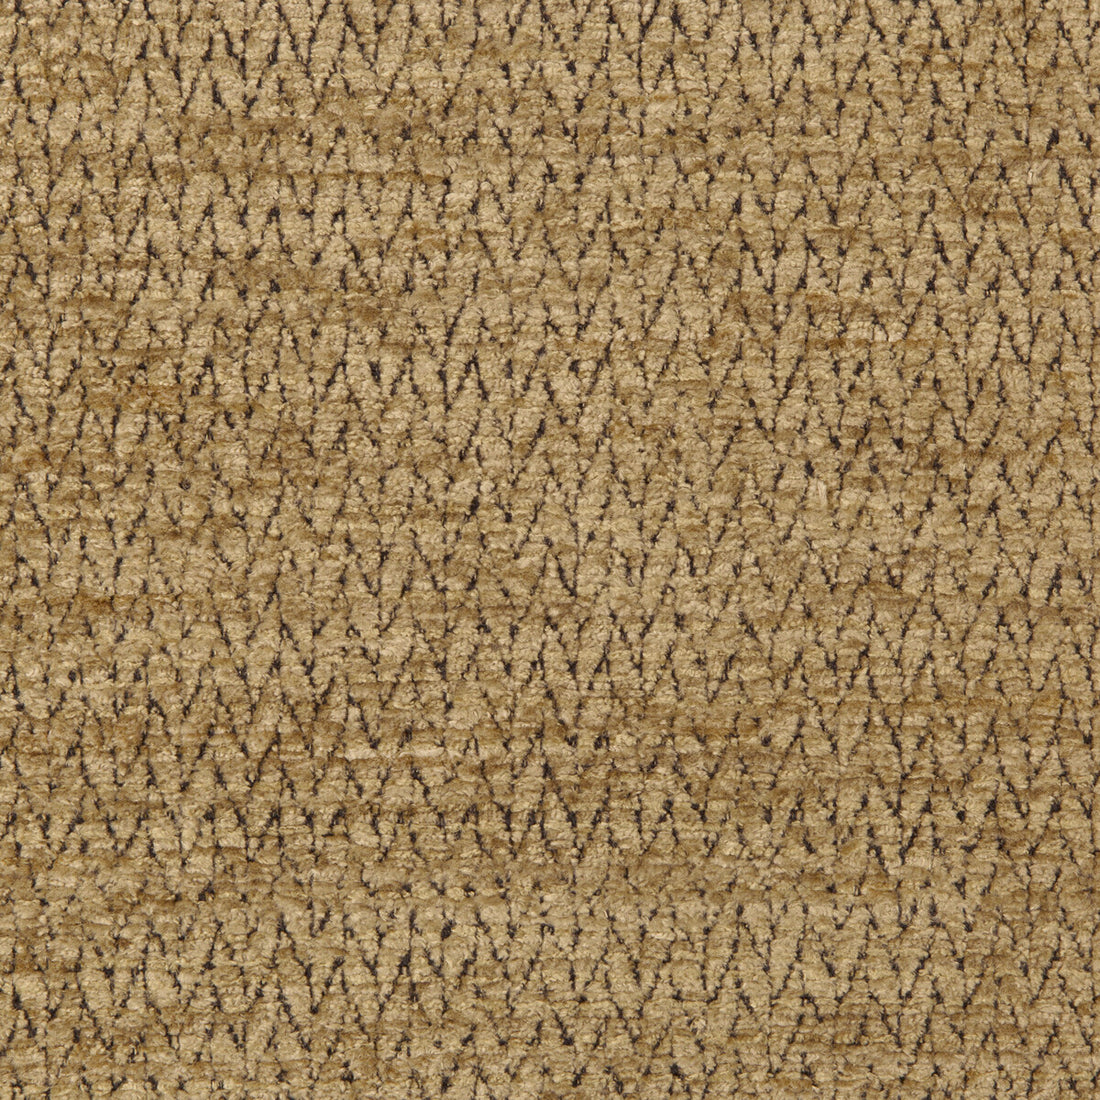 Cassien Texture fabric in walnut color - pattern 8019146.68.0 - by Brunschwig &amp; Fils in the Chambery Textures II collection